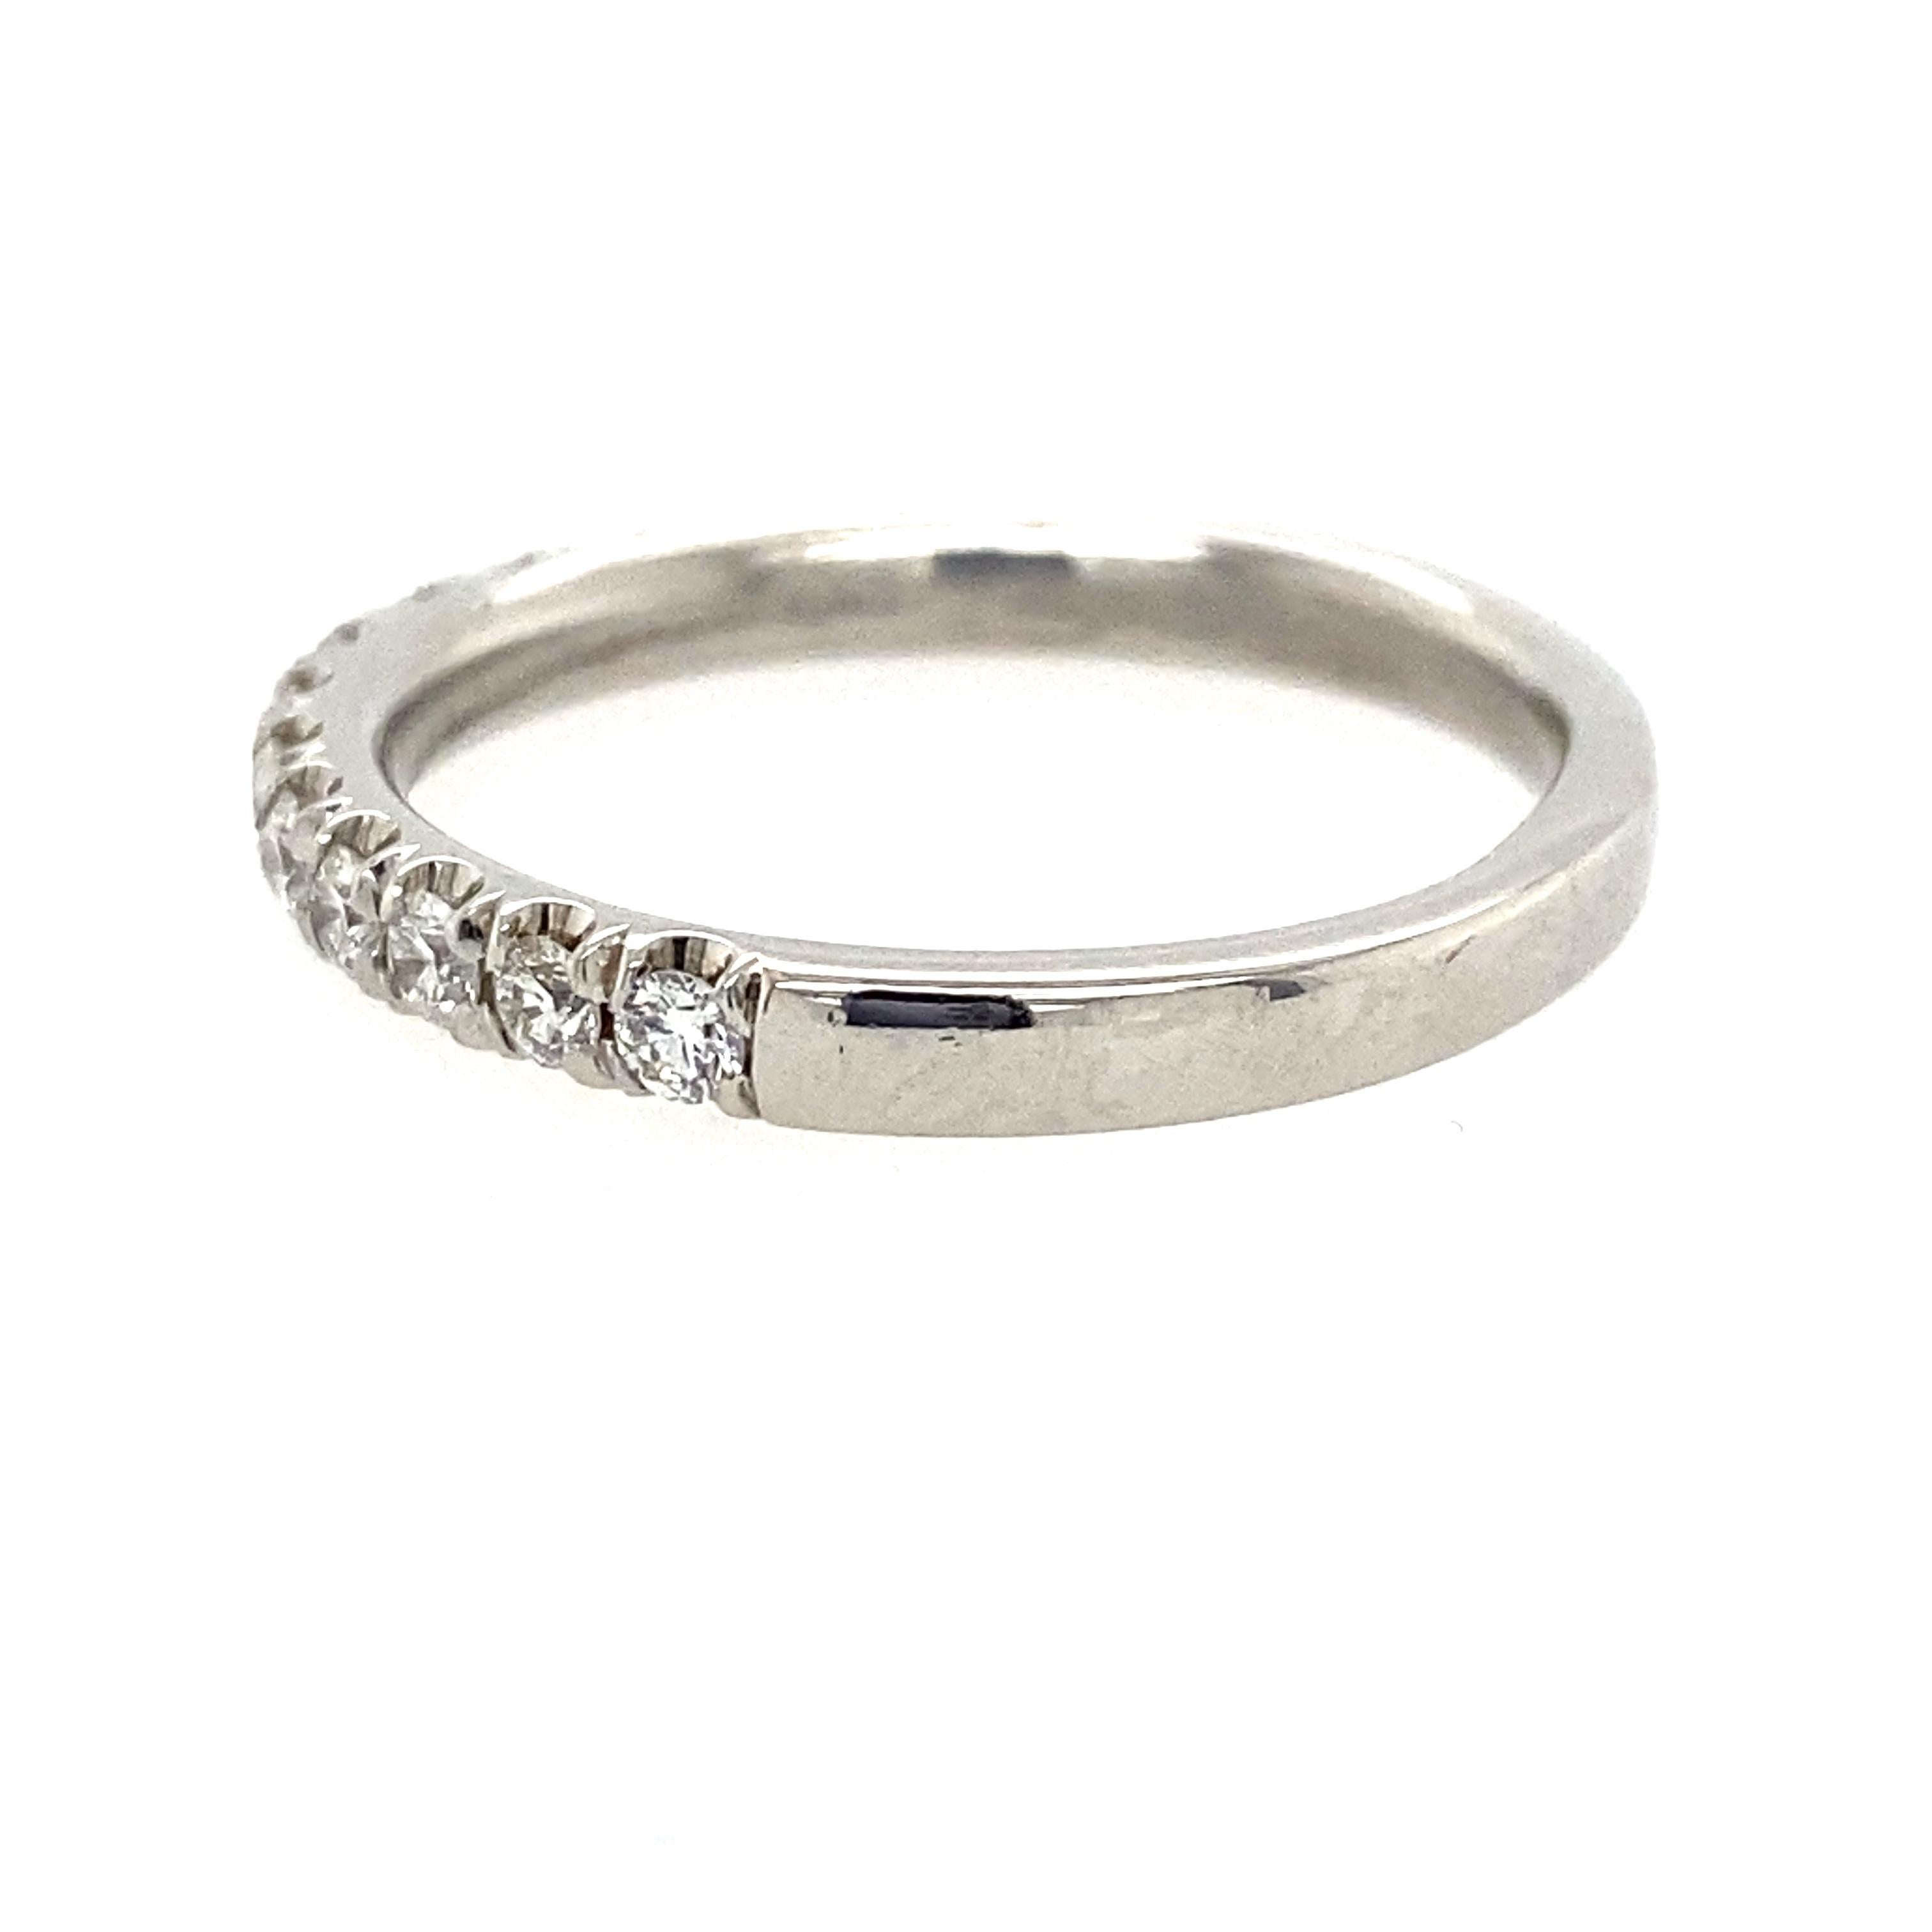 One platinum (stamped PT) diamond wedding band set with fifteen round brilliant cut diamonds, approximately 0.46 carat total weight with matching H color and VS2 clarity.